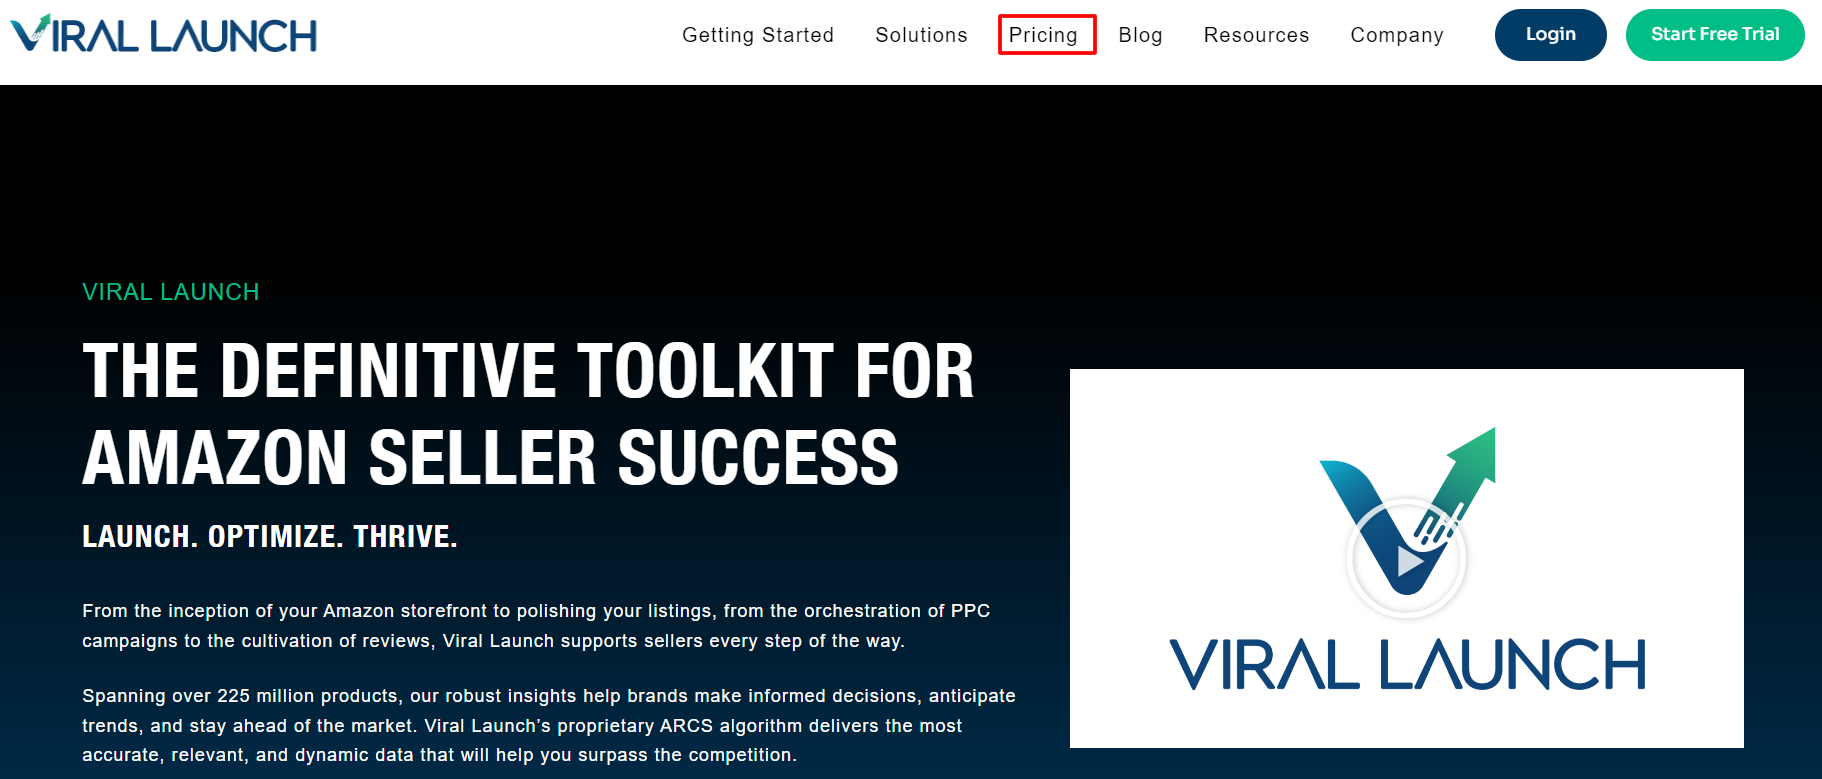 Viral Launch Homepage & Click Pricing Option